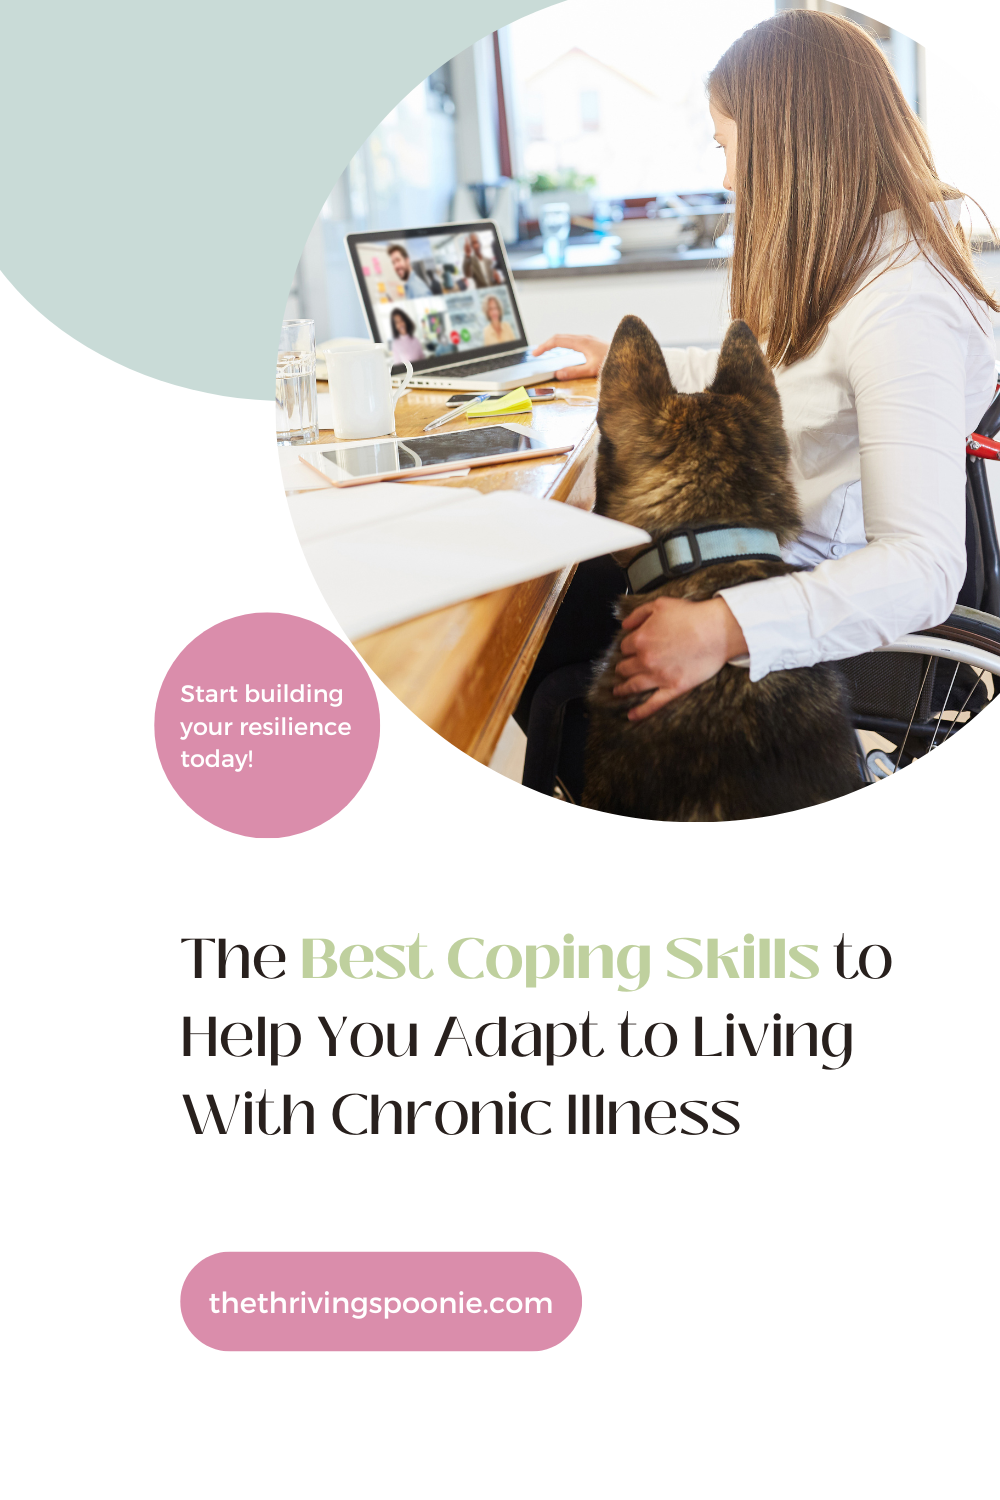 Get The Best Coping Skills to Help You Adapt to Living With Chronic Illness in This Post From The Thriving Spoonie